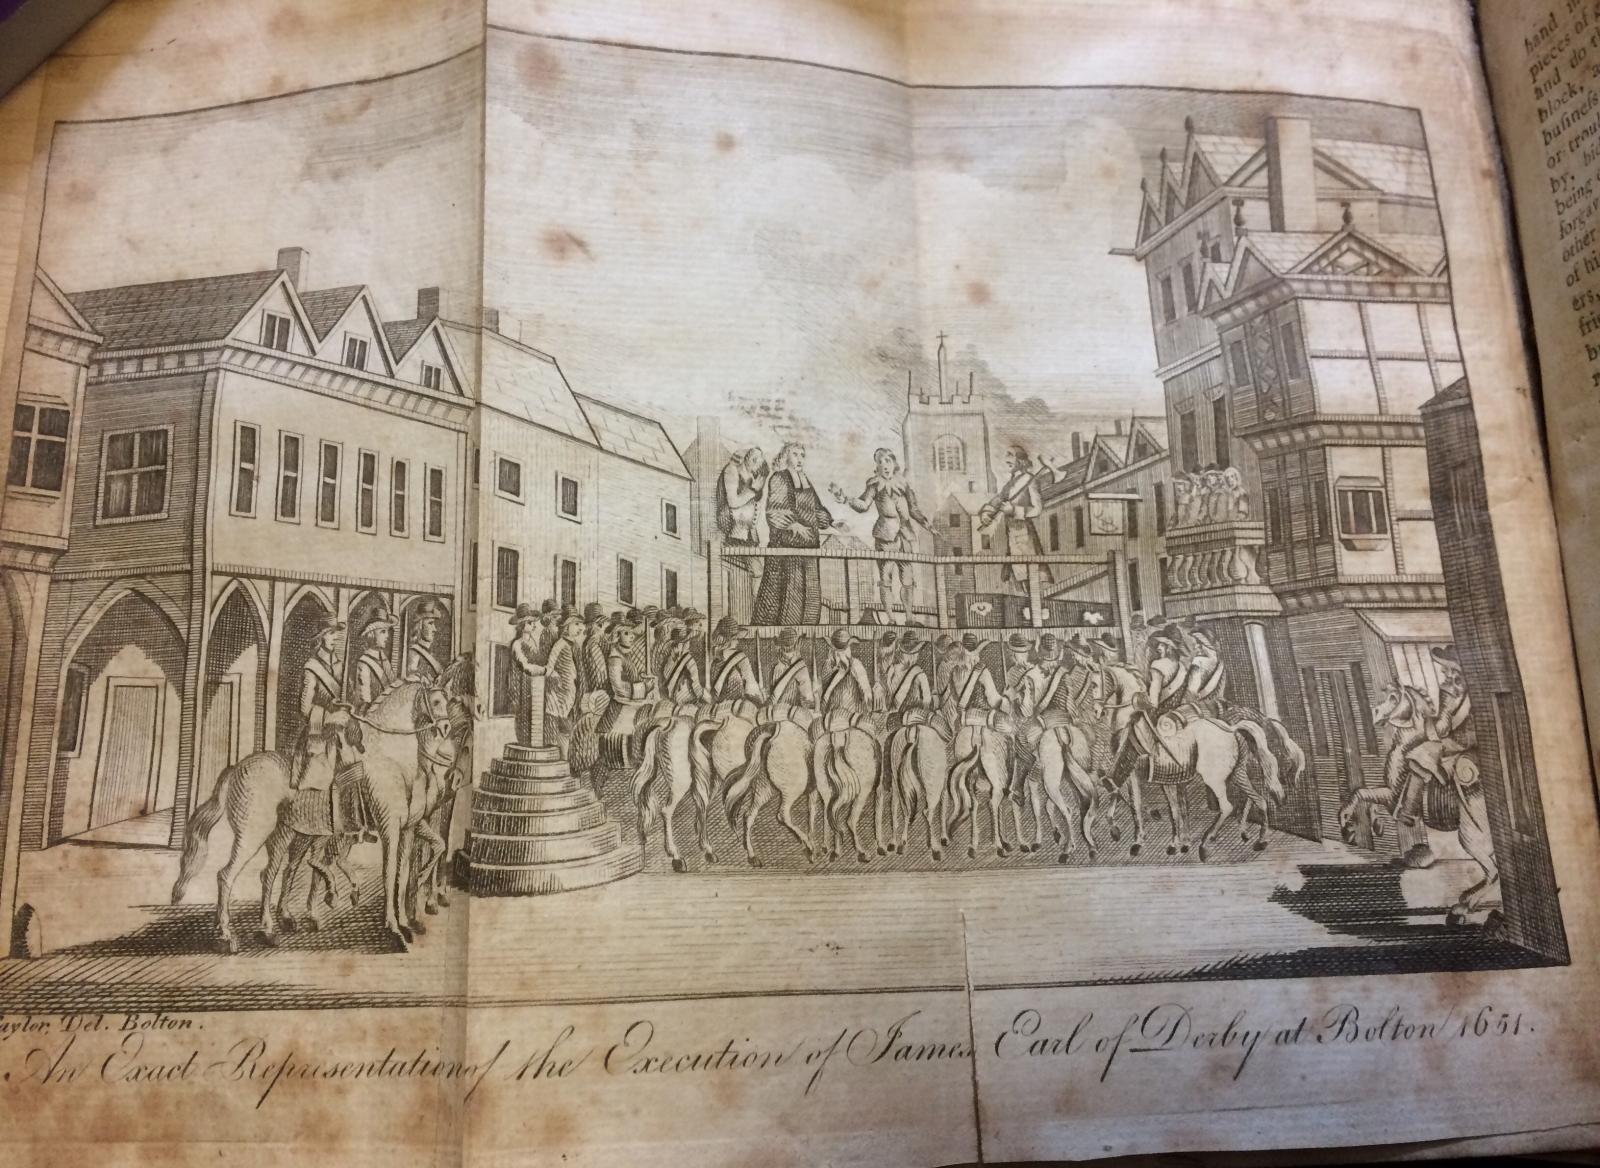 LMH's copy of A Description of the Memorable Sieges and Battles in the North of England